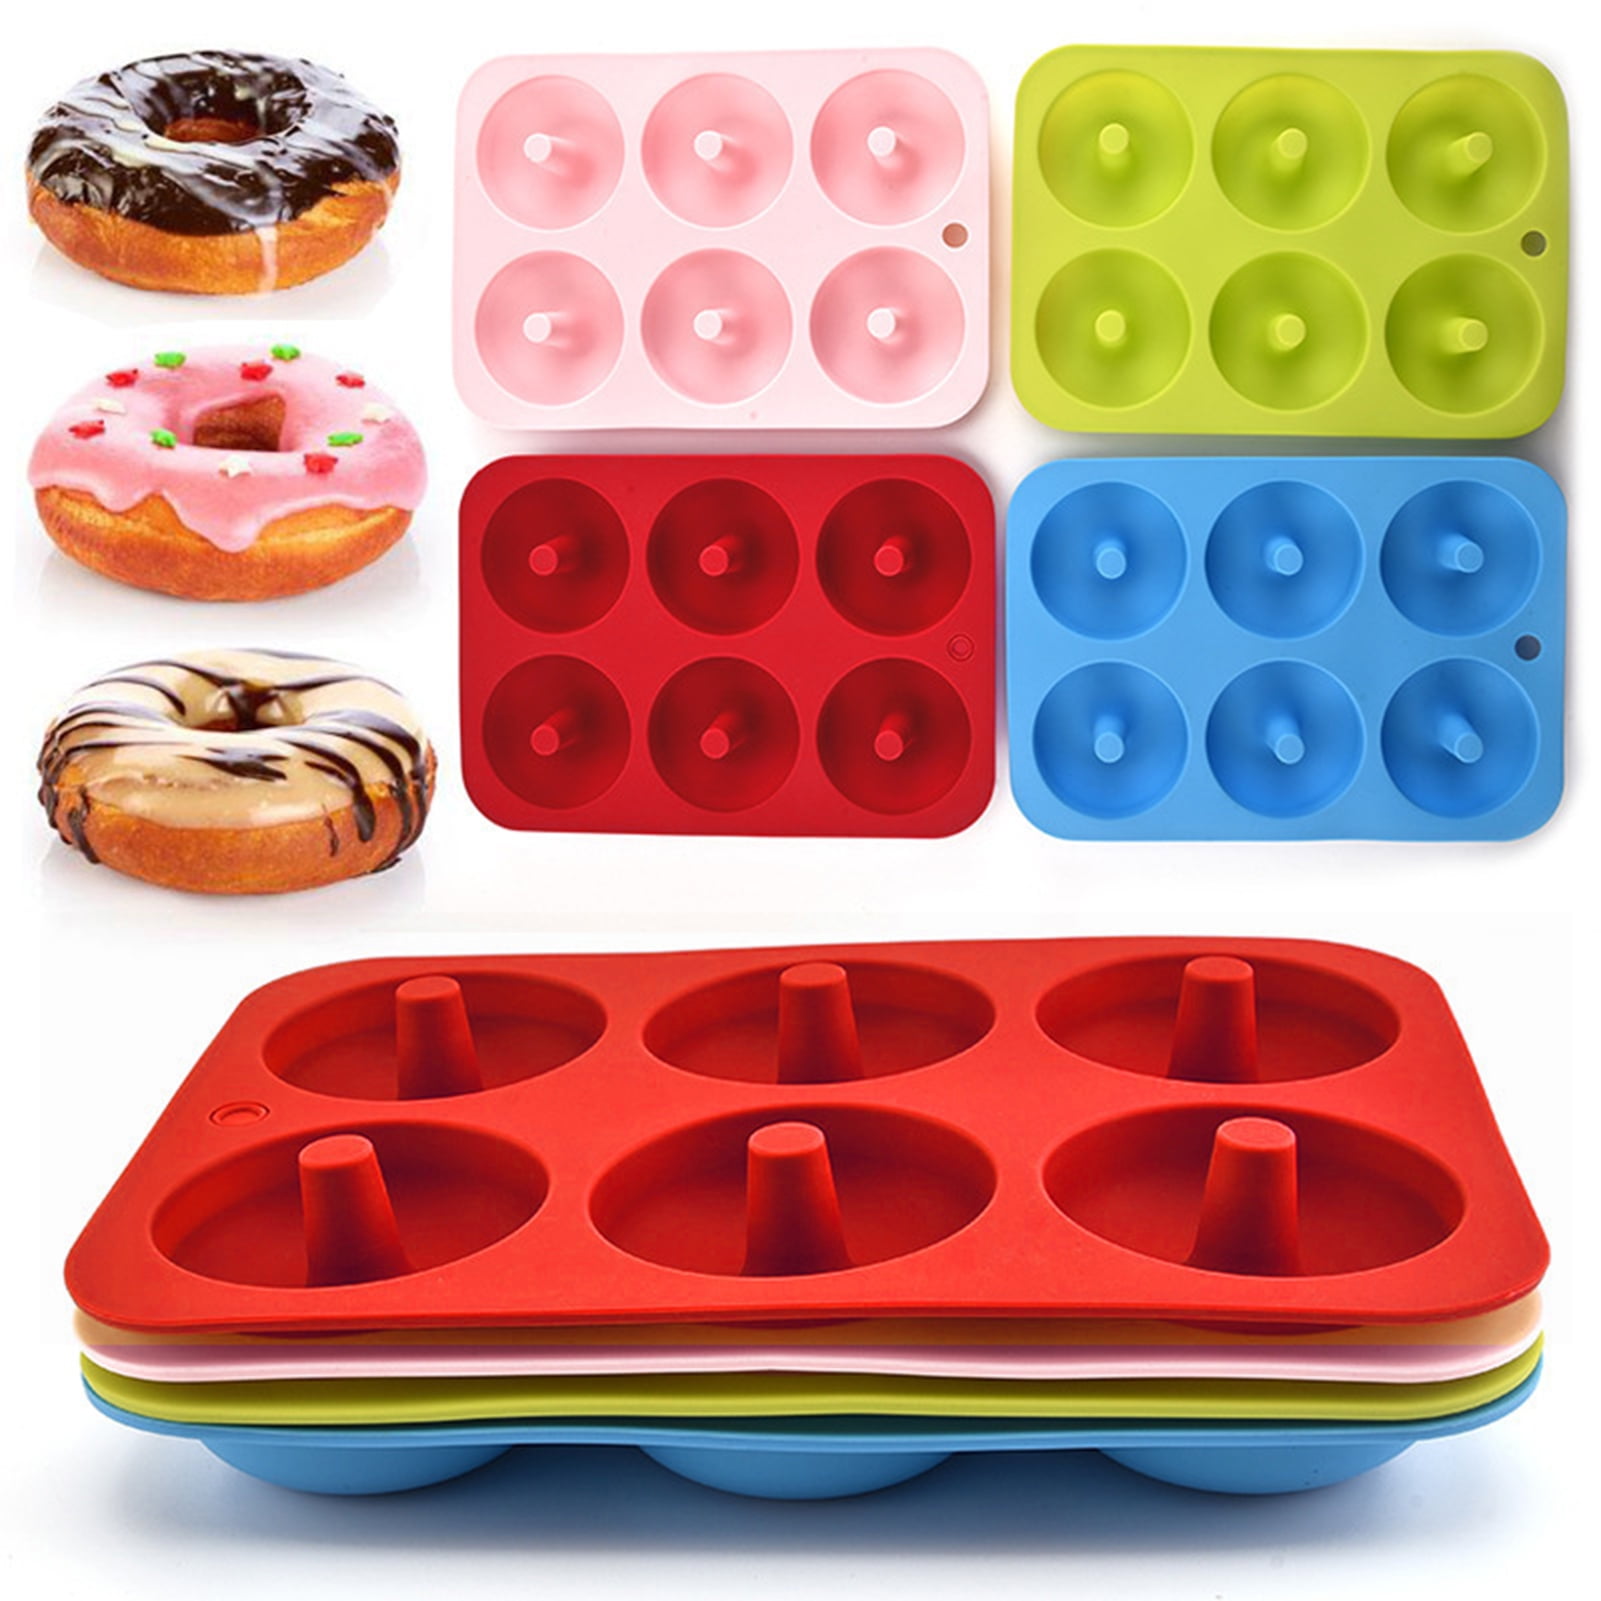 5 Piece Non-Stick Silicone Cake Baking Set with Baking Tray, Donuts, Toast  Molds, Round Cake Pan, 5-in-1 High Temperature Resistant Silicone Baking  Mold, Kitchen Utensils Baking Supplies Halloween Christmas Party Favor